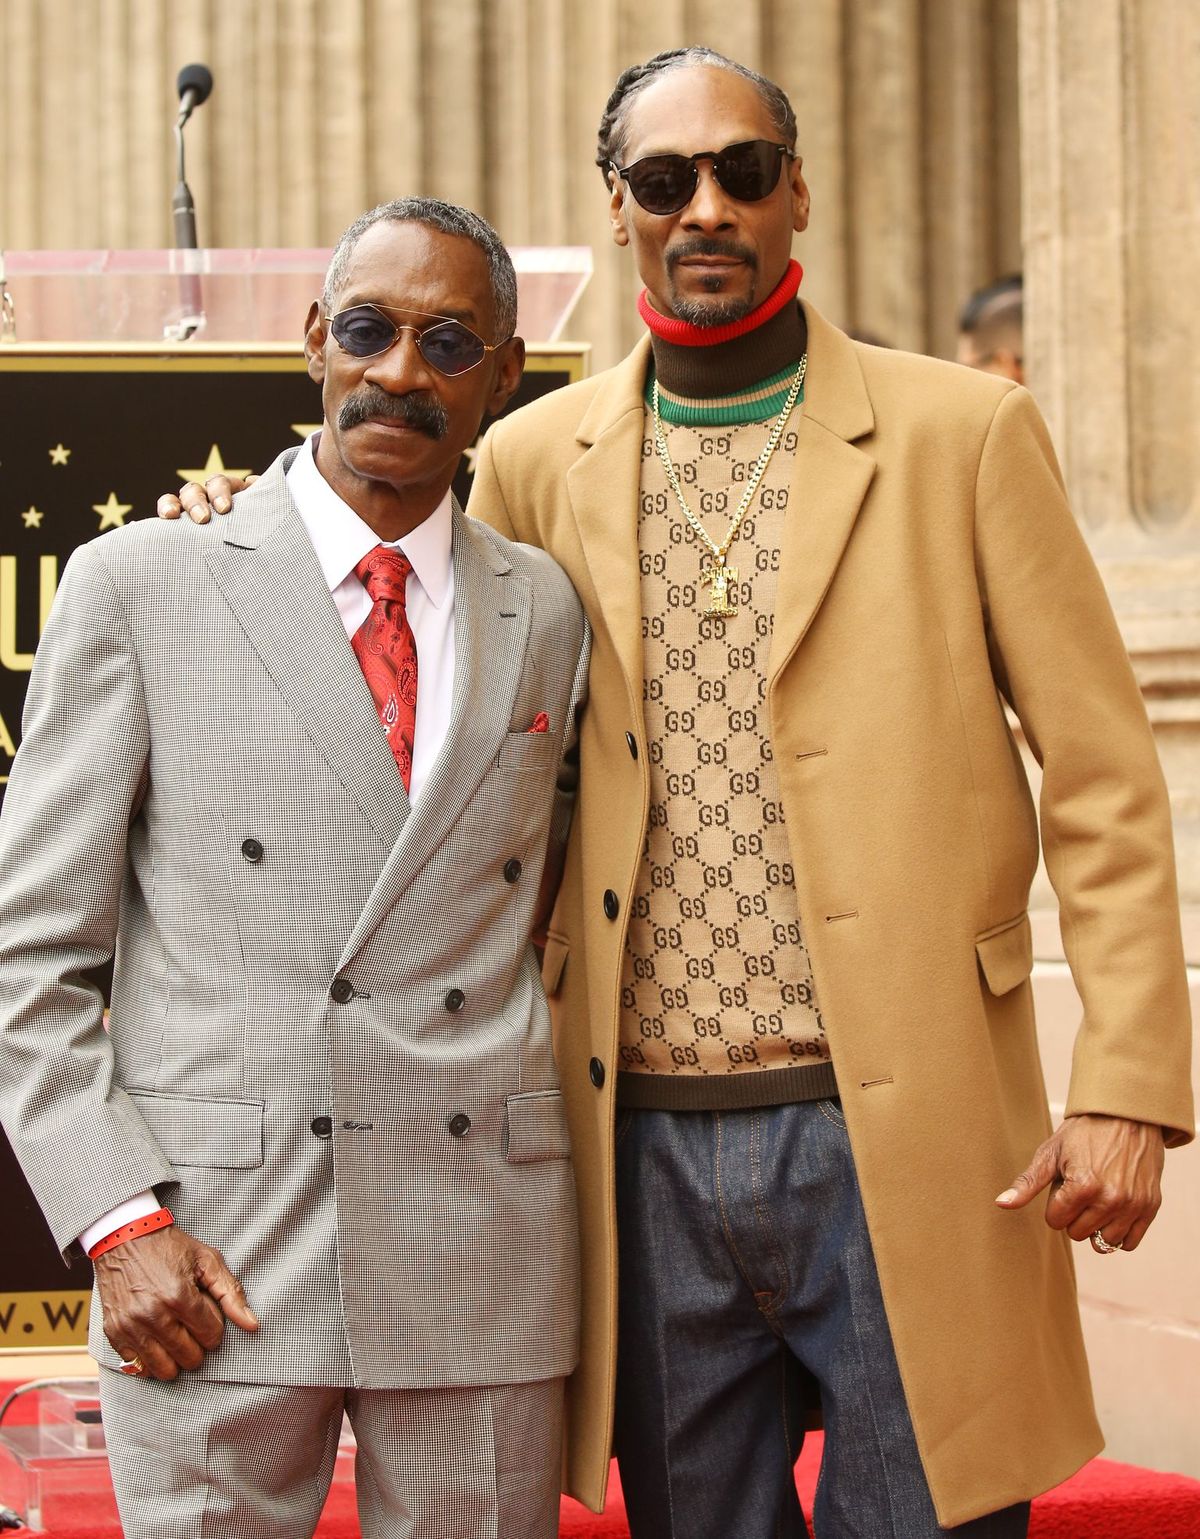 Snoop Dogg and his father at the ceremony honoring Snoop Dogg with a Star on The Hollywood Walk of Fame held on November 19, 2018 | Source: Getty Images